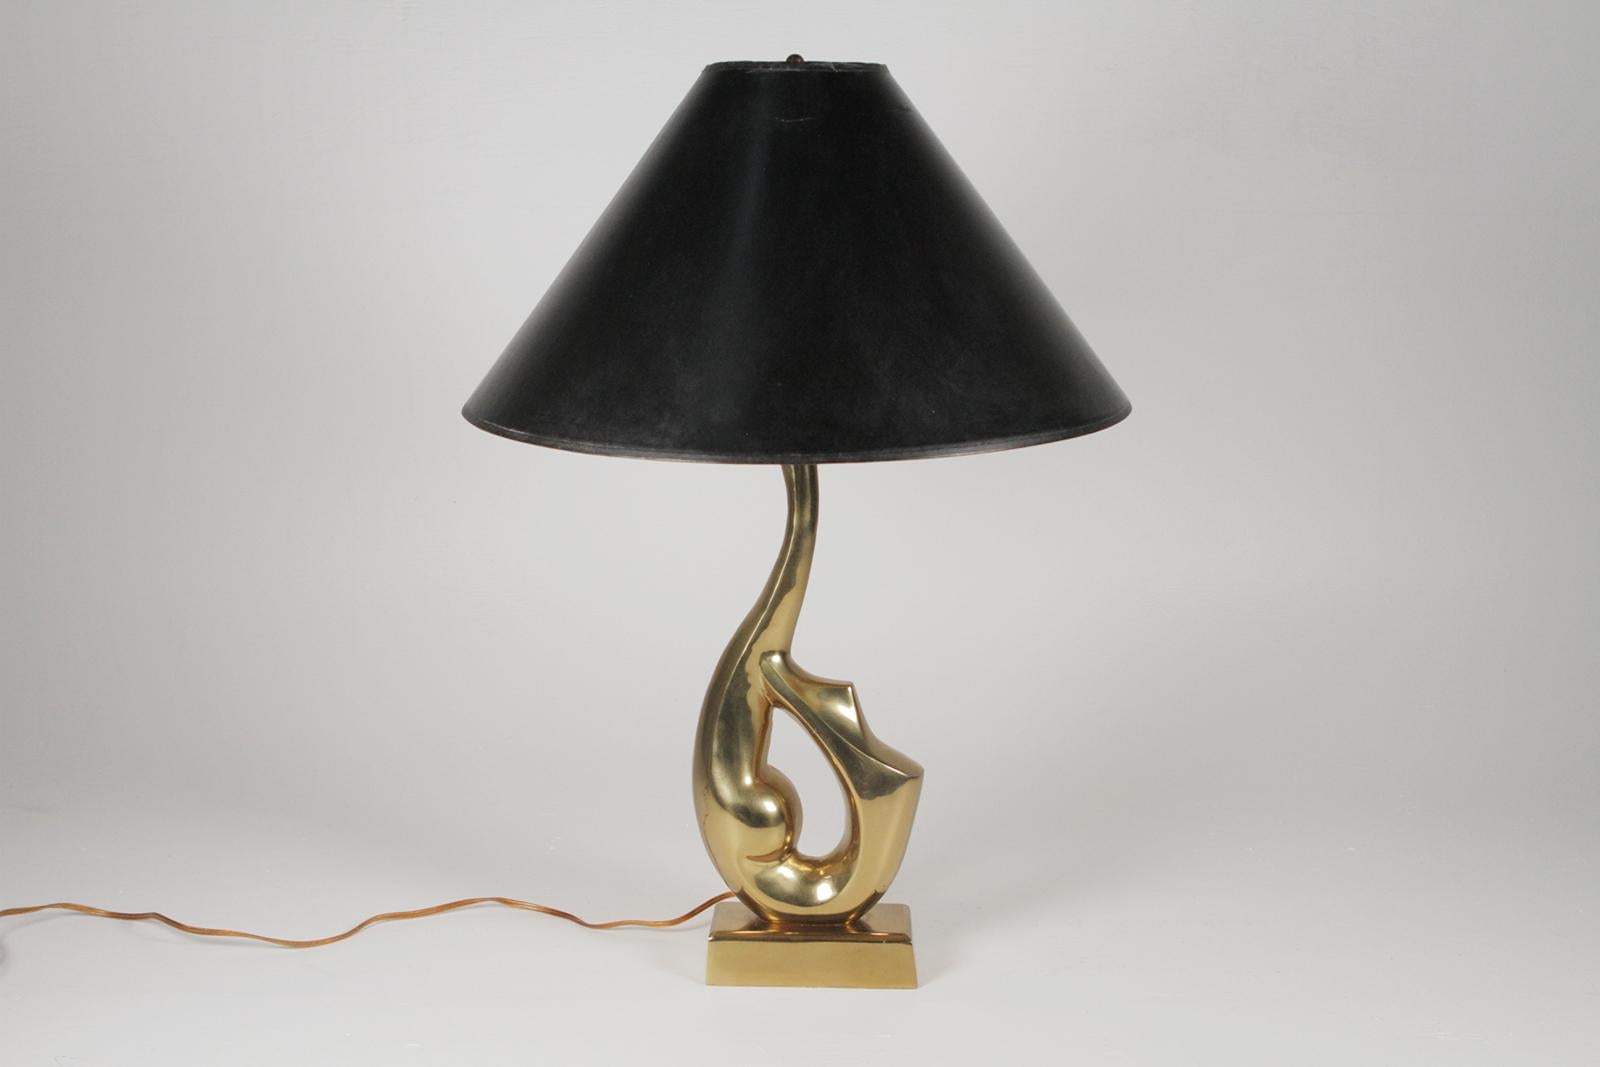 Midcentury brass lamp in the form of a swimmer
Dimensions: 7’ W x 3.5